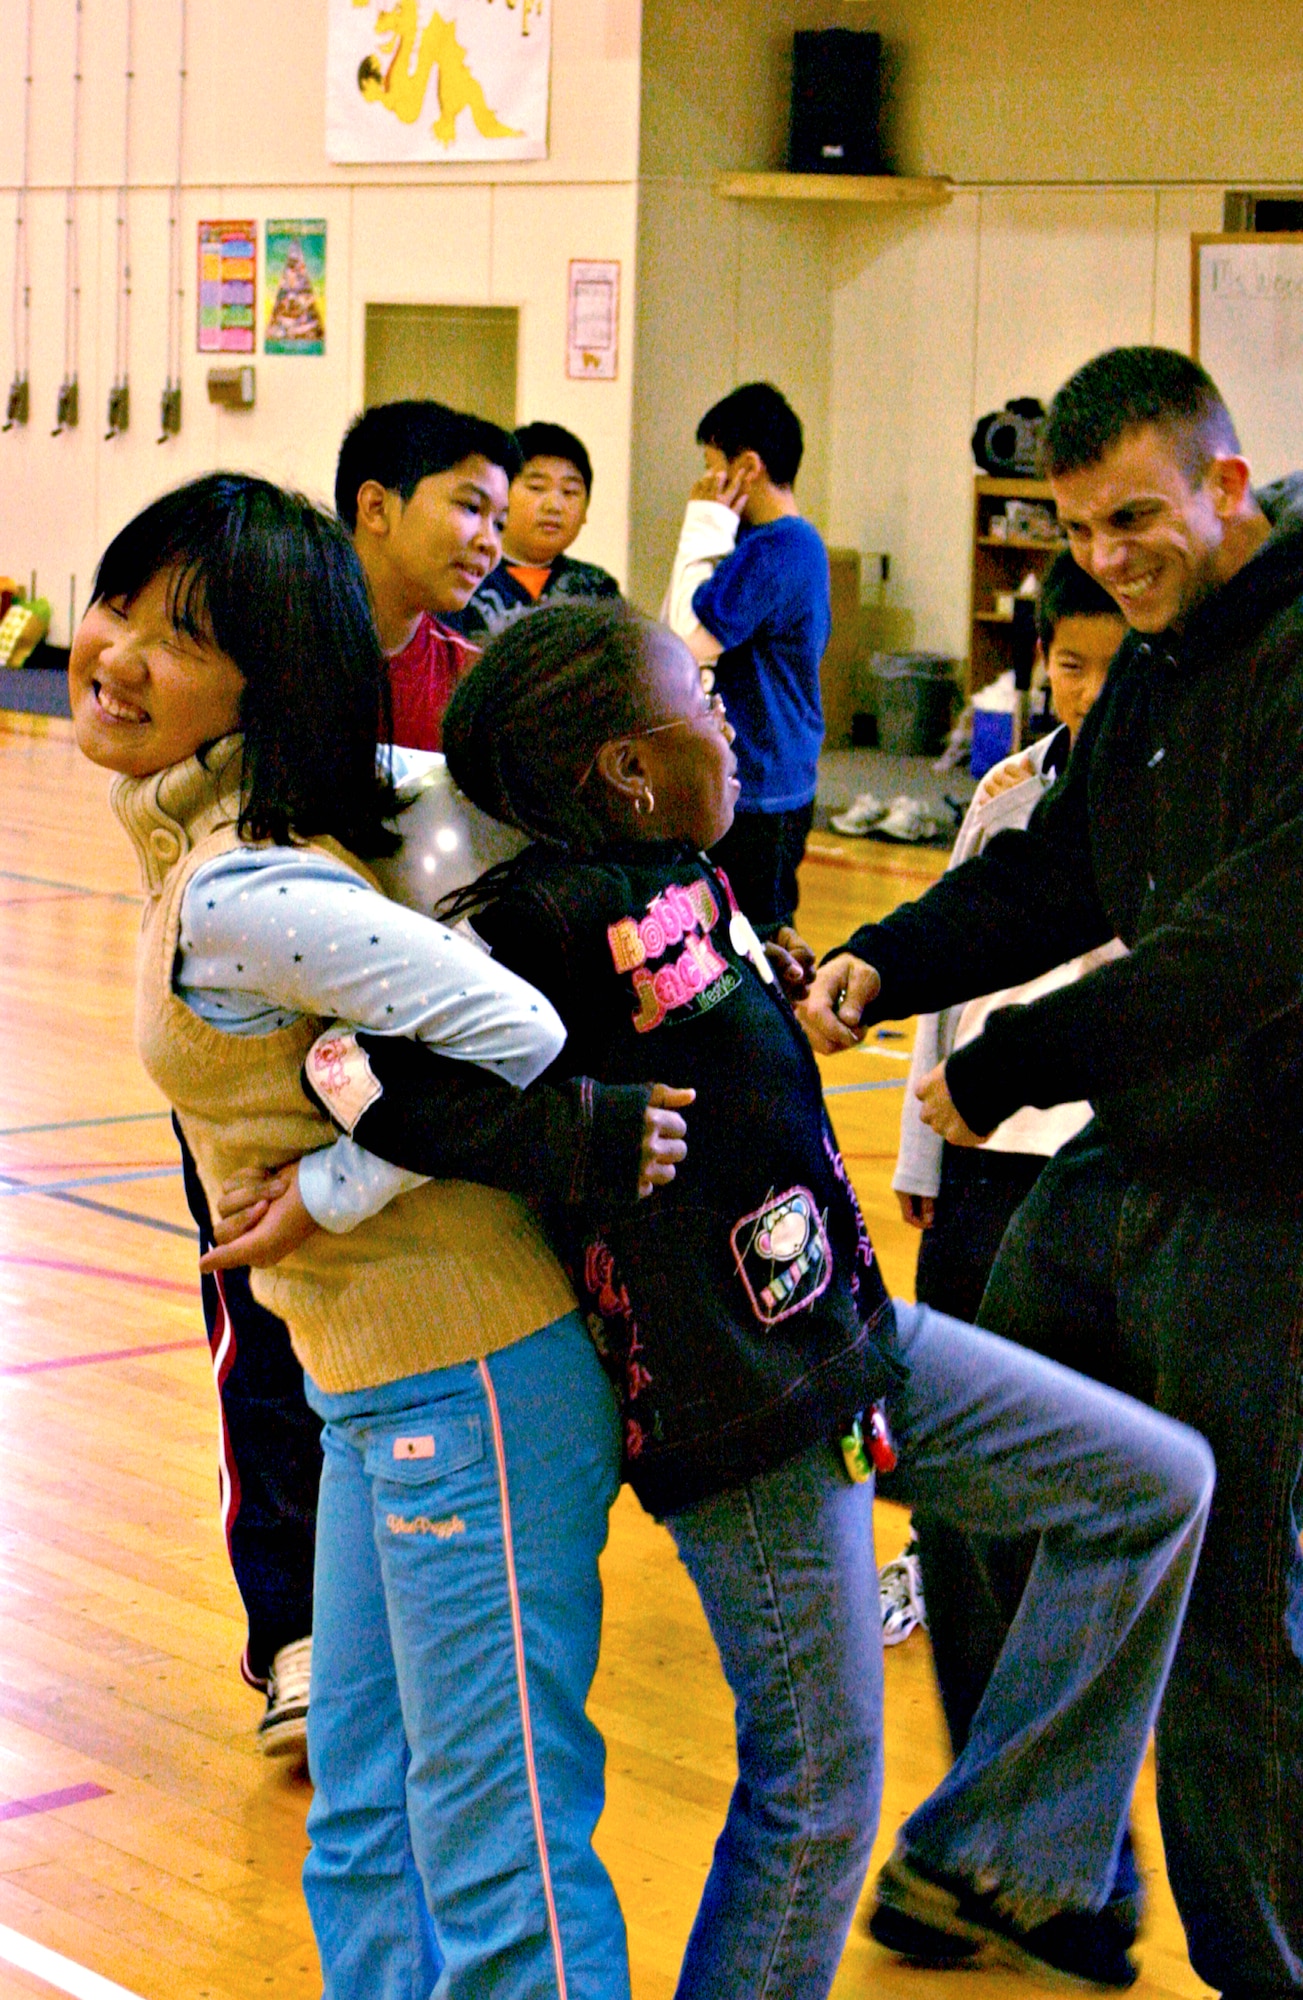 MISAWA AIR BASE, Japan -- Mao Kashiwazaki and Faith Moss play a game where the object is to pop a balloon between their backs at Sollars Elementary School, Oct. 20, 2007. Mao is a student at Kinoshita Elementary School in Oirase Town participating in a cultural exchange program here on Misawa where Faith attends school.
(U.S. Air Force photo by Airman 1st Class Eric Harris)(RELEASED)